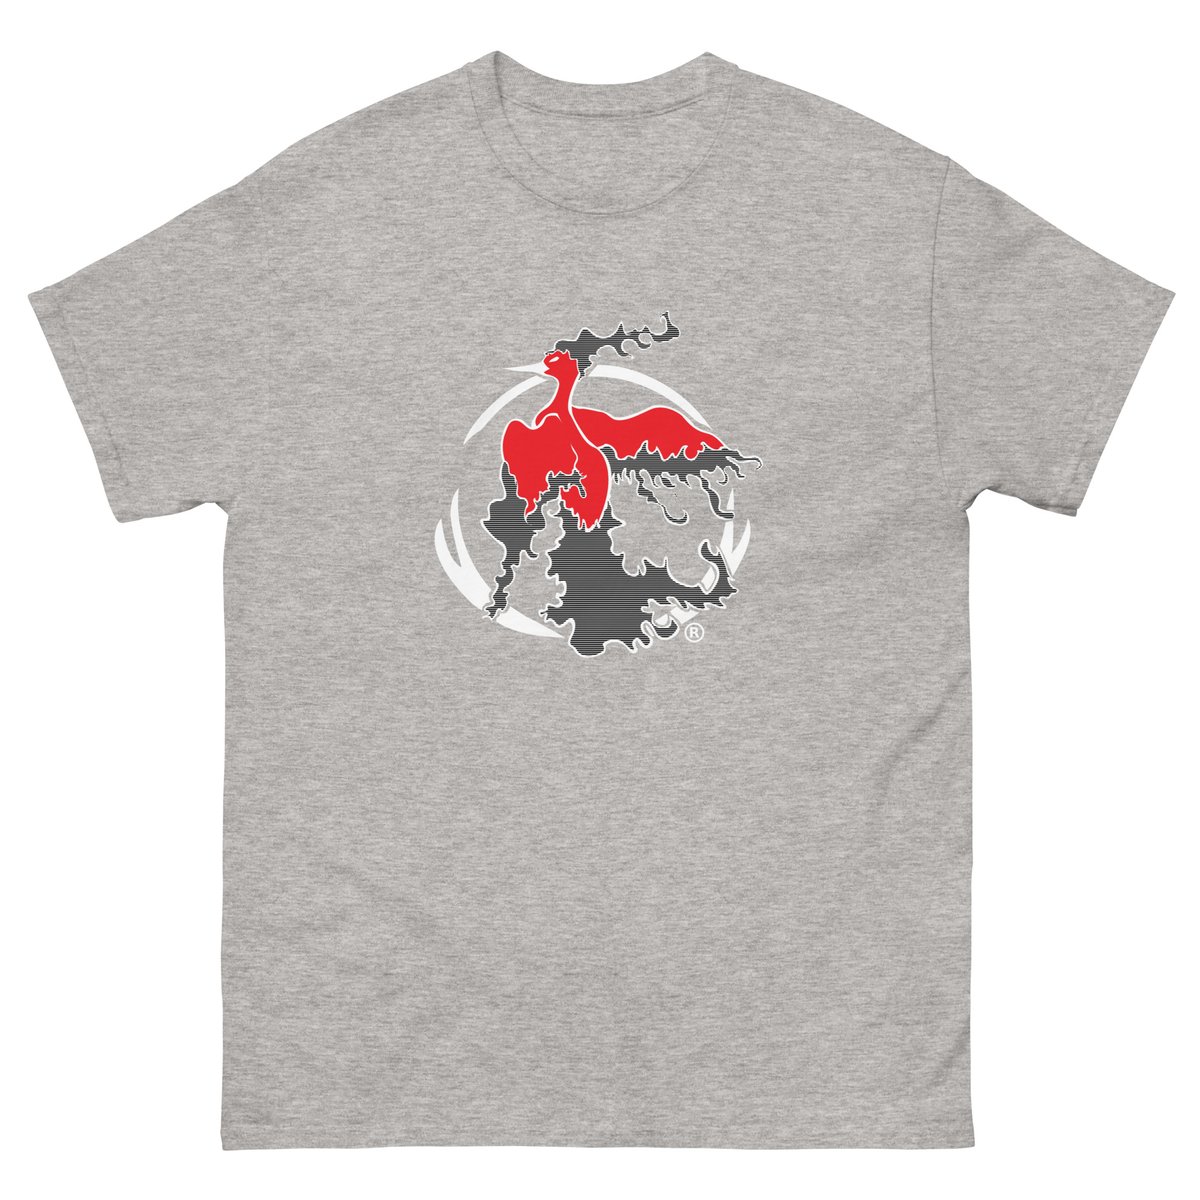 Image of Valor Moltres Poke Tee (3 colors)